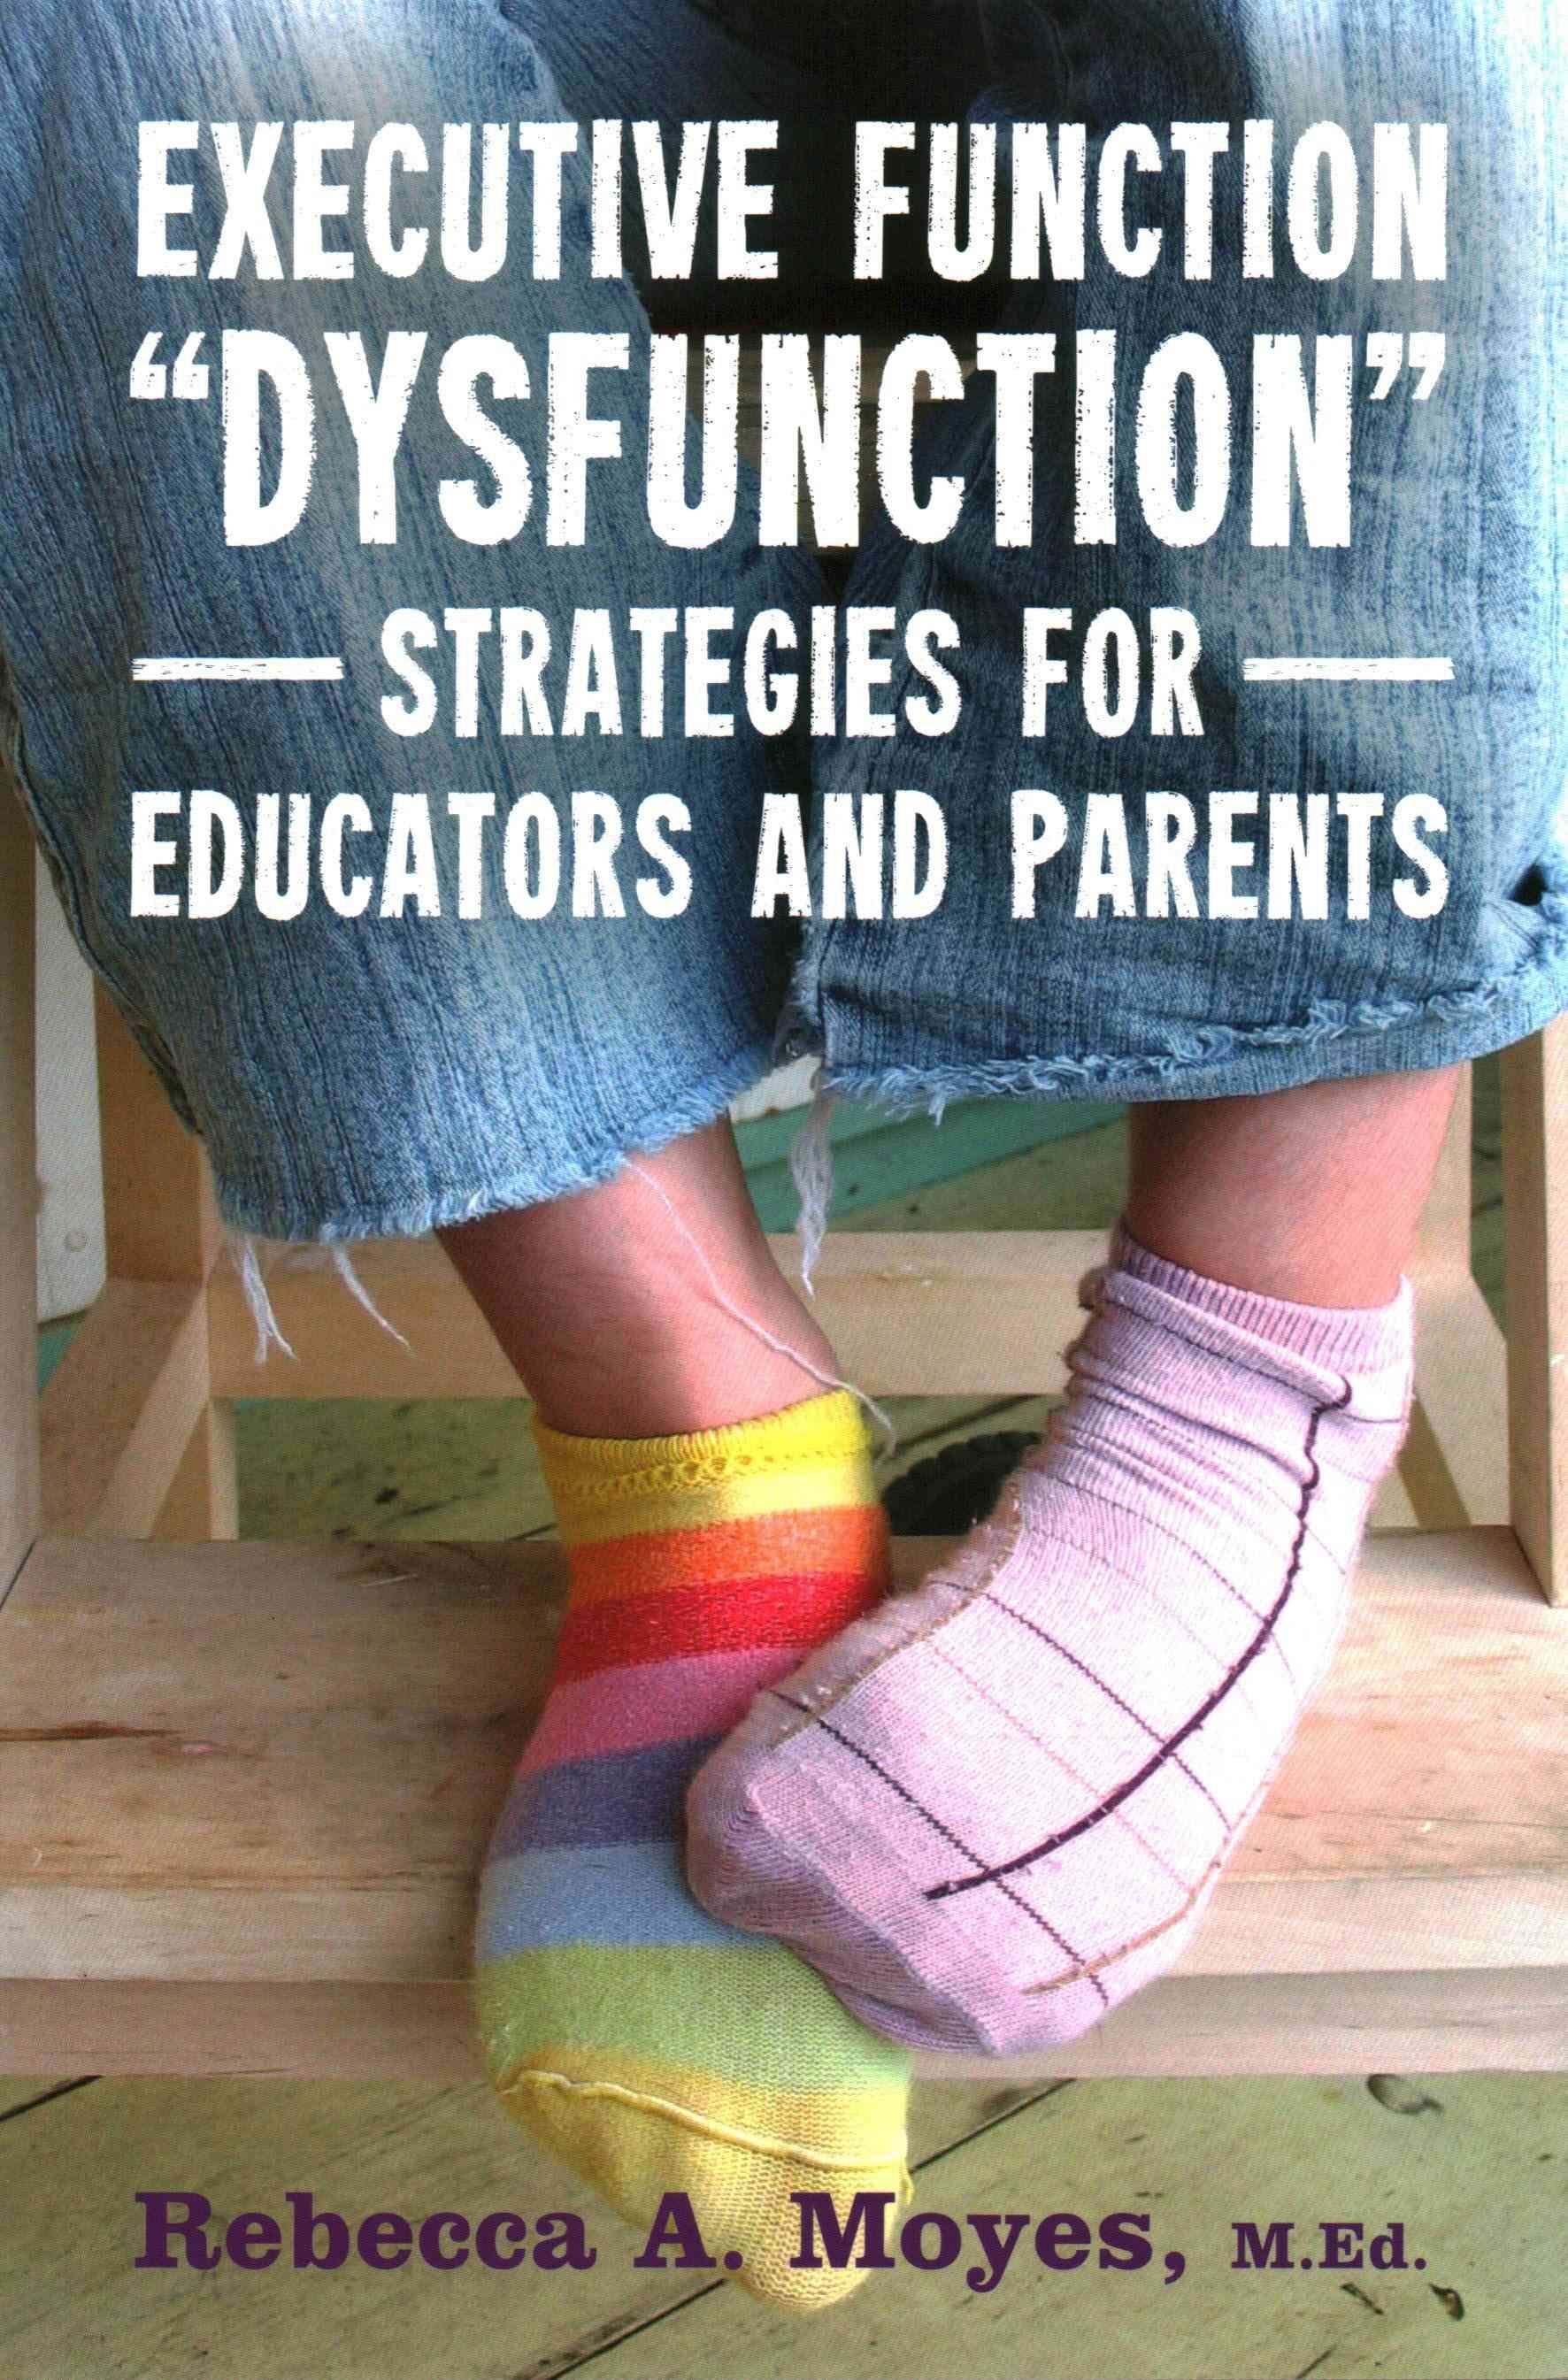 Executive Function Dysfunction - Strategies for Educators and Parents